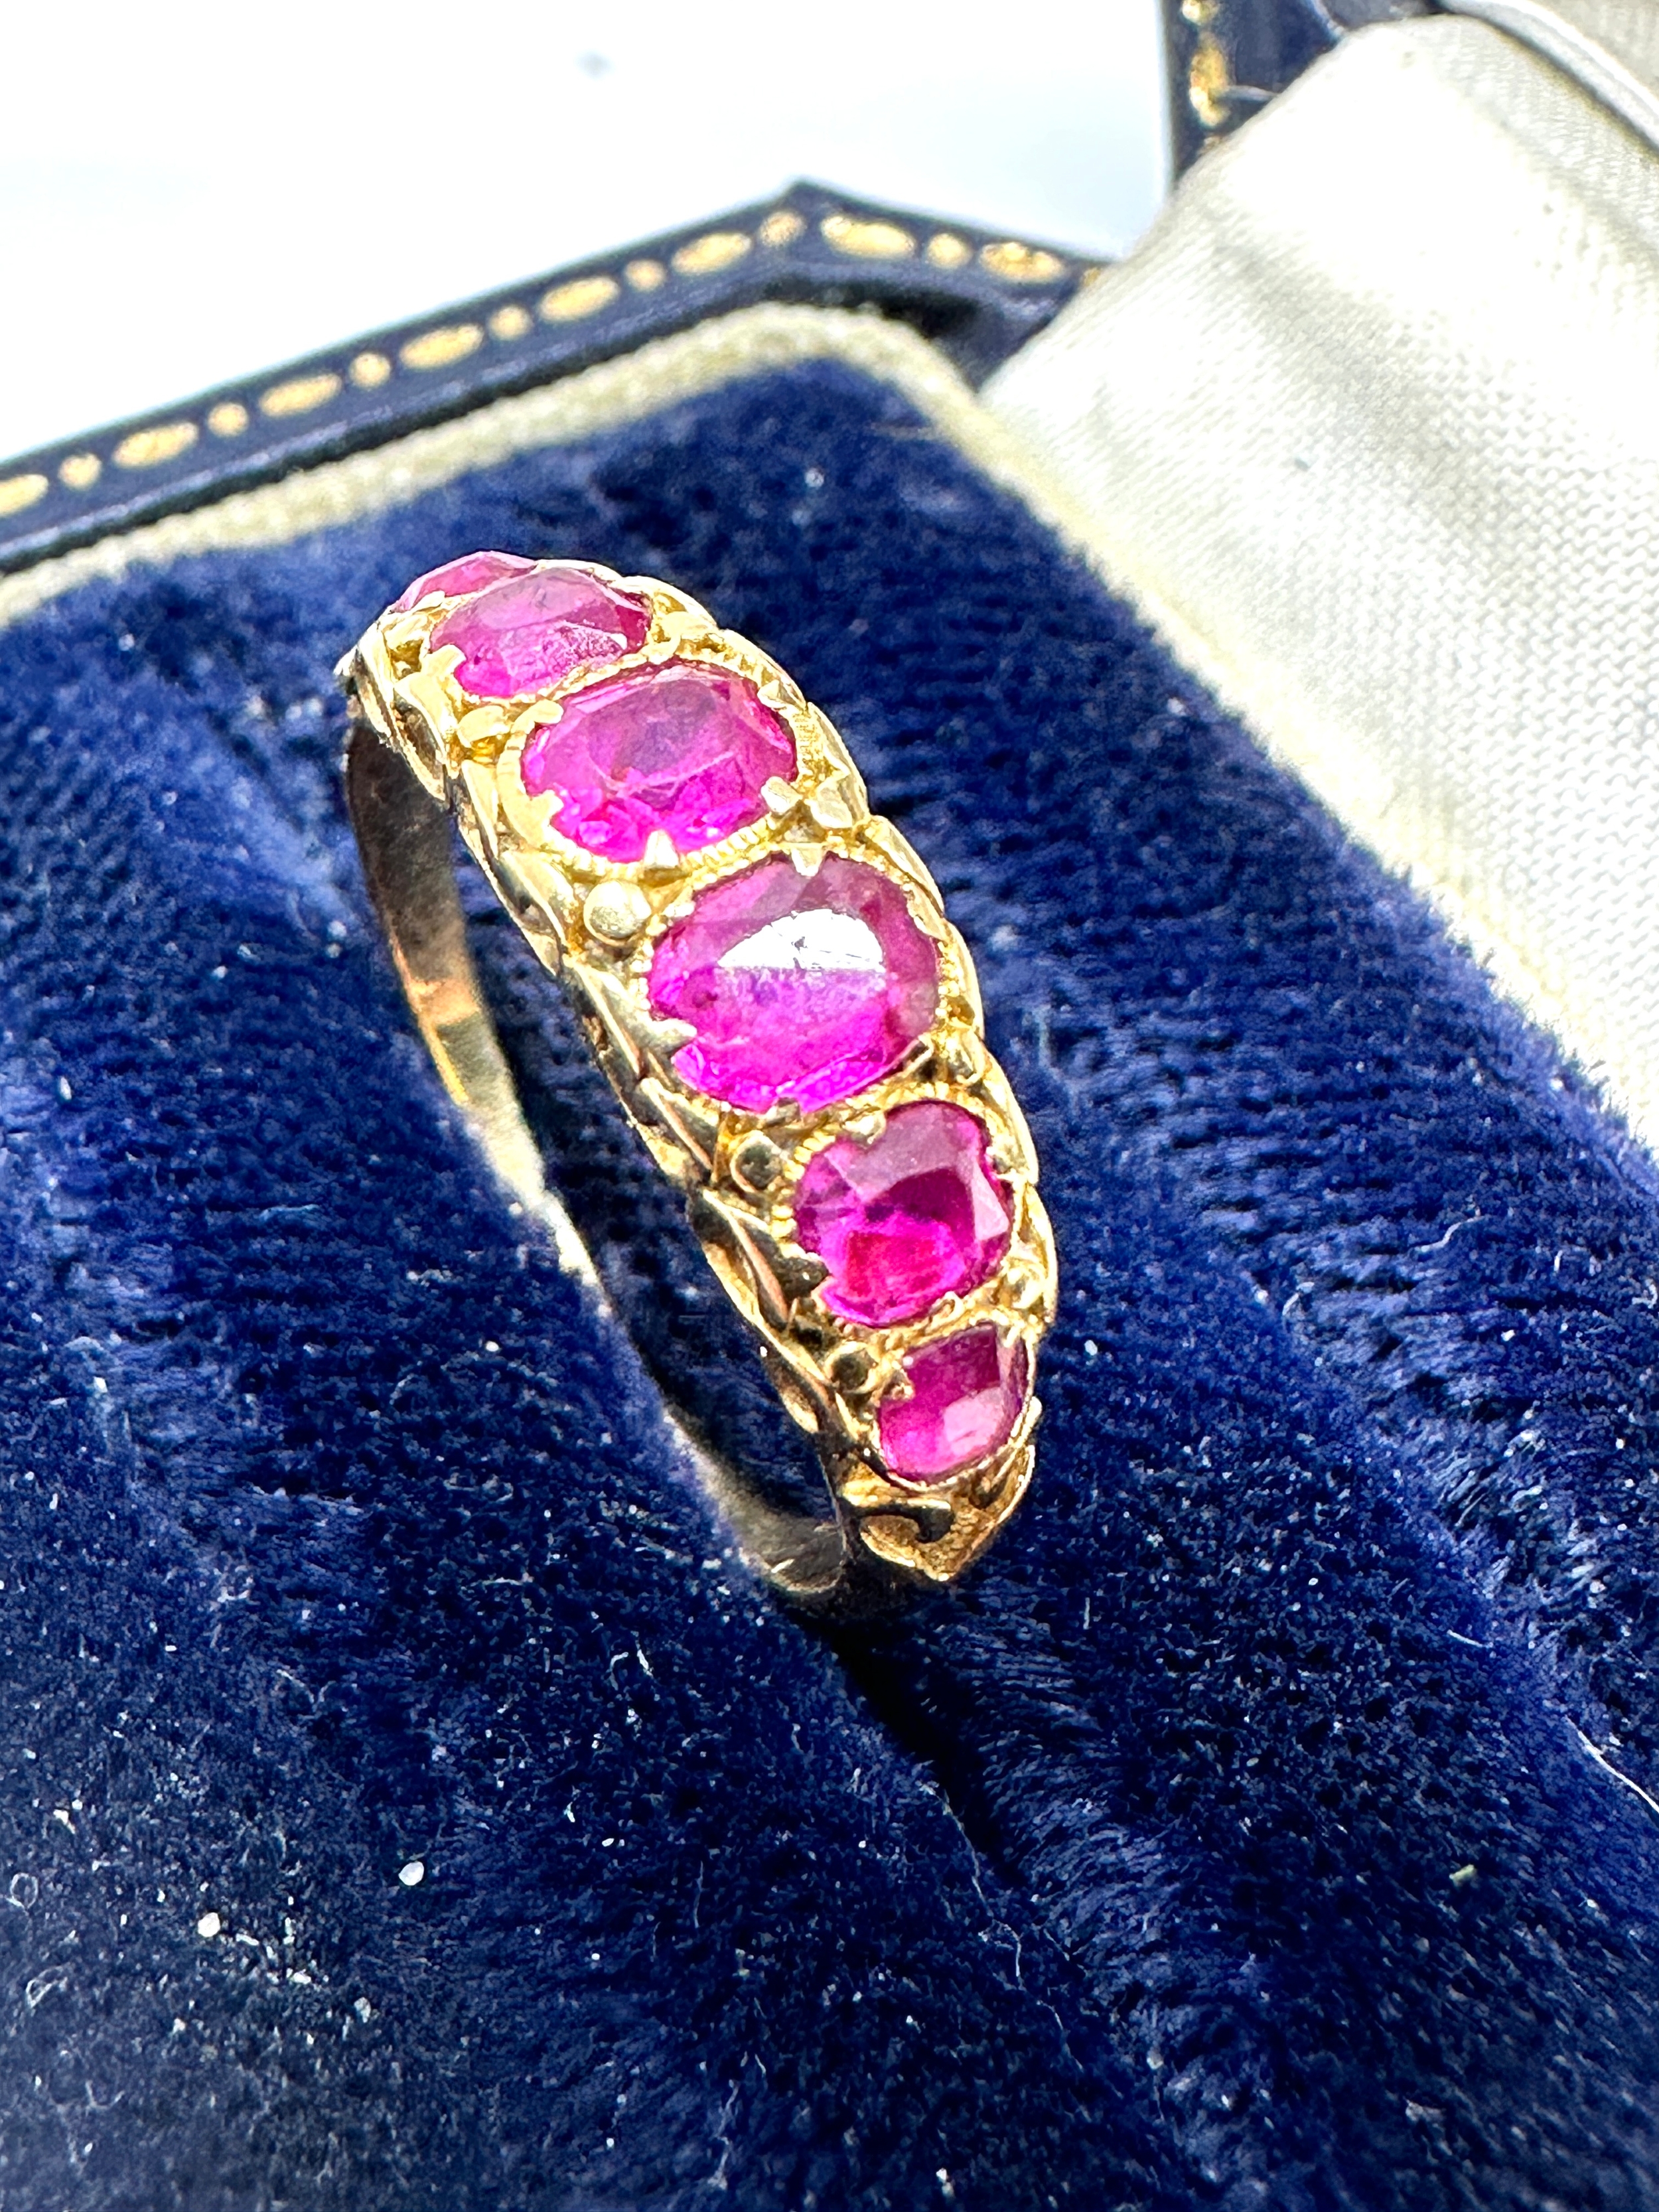 Vintage 18ct gold ruby ring weight 1.8g xrt tested as 18ct - Image 3 of 4